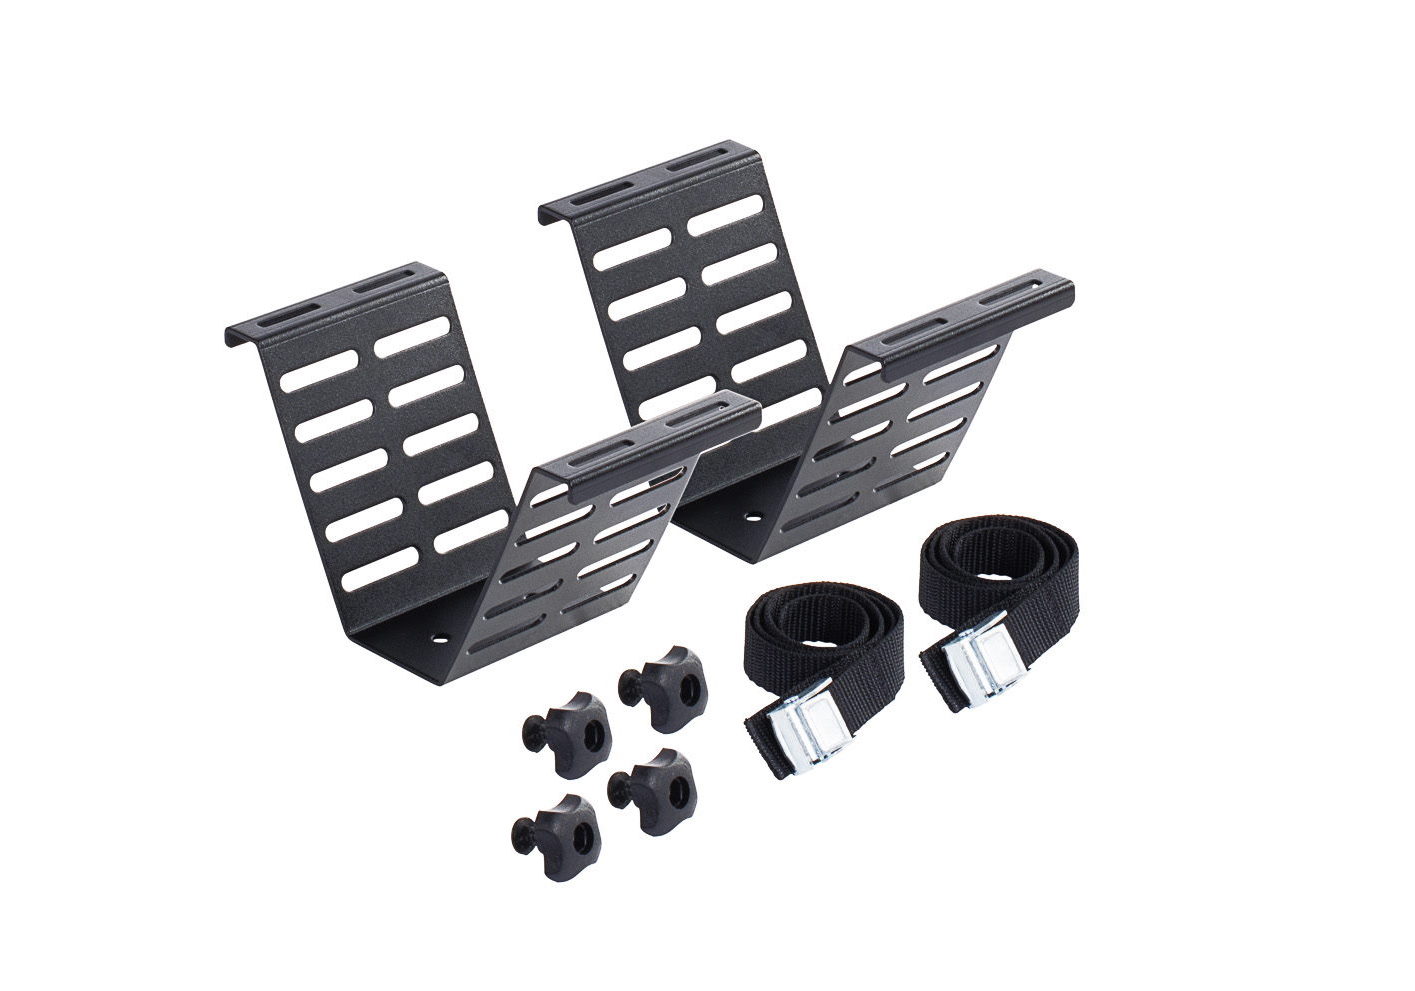 :CRUZ adapter kit for wider tyres no. 940-427